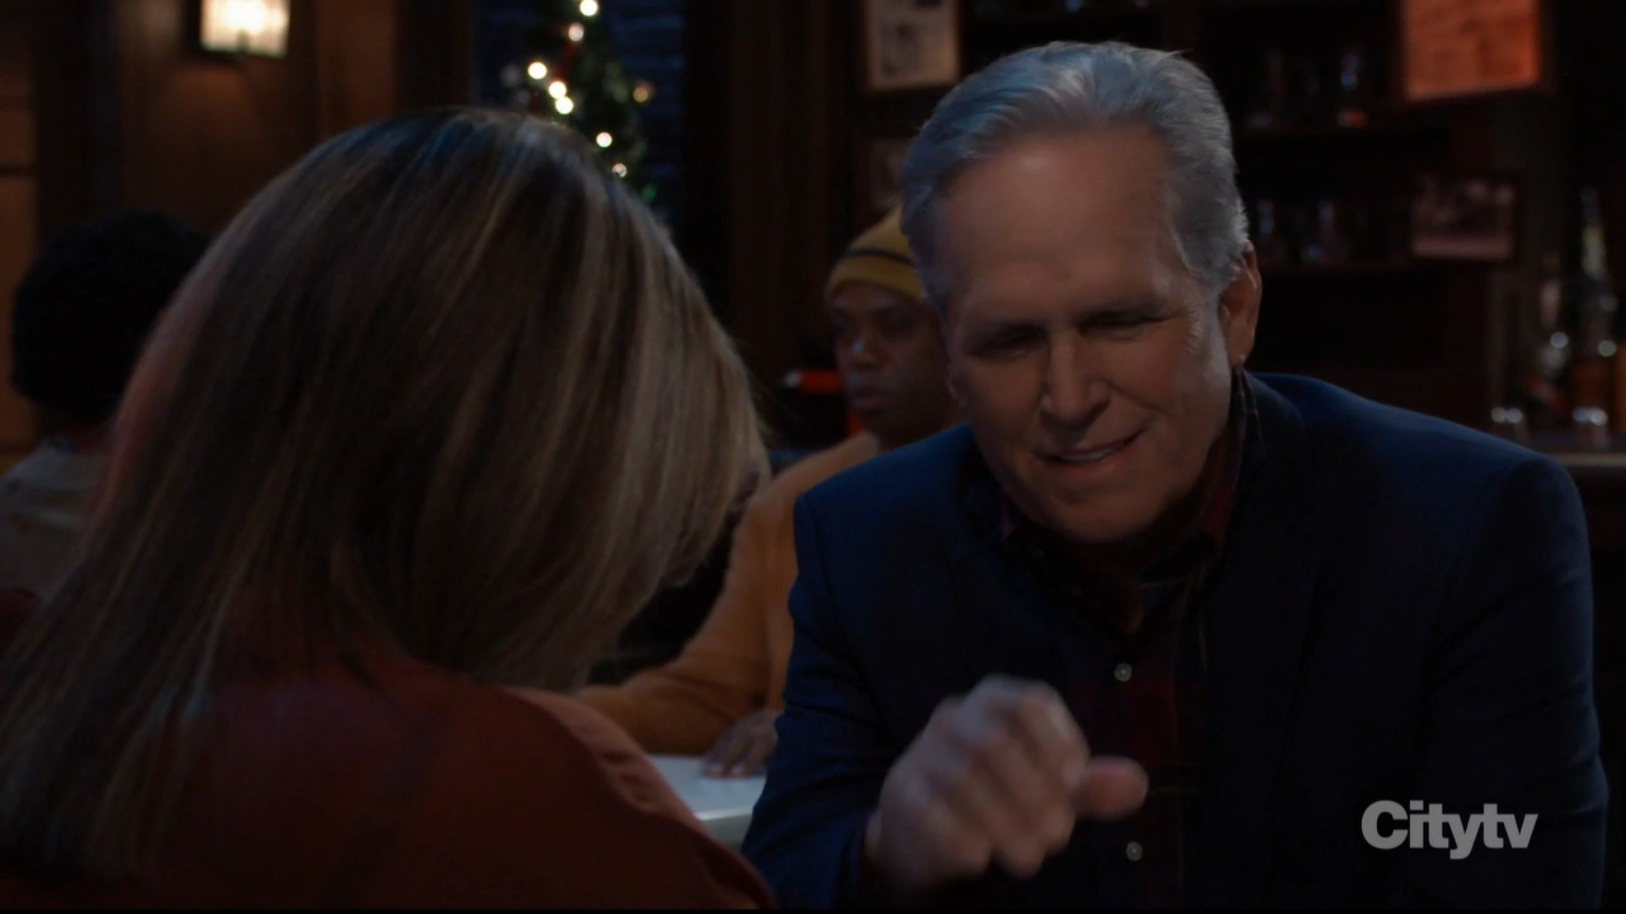 gregory and alexis on date GH recaps SoapsSpoilers